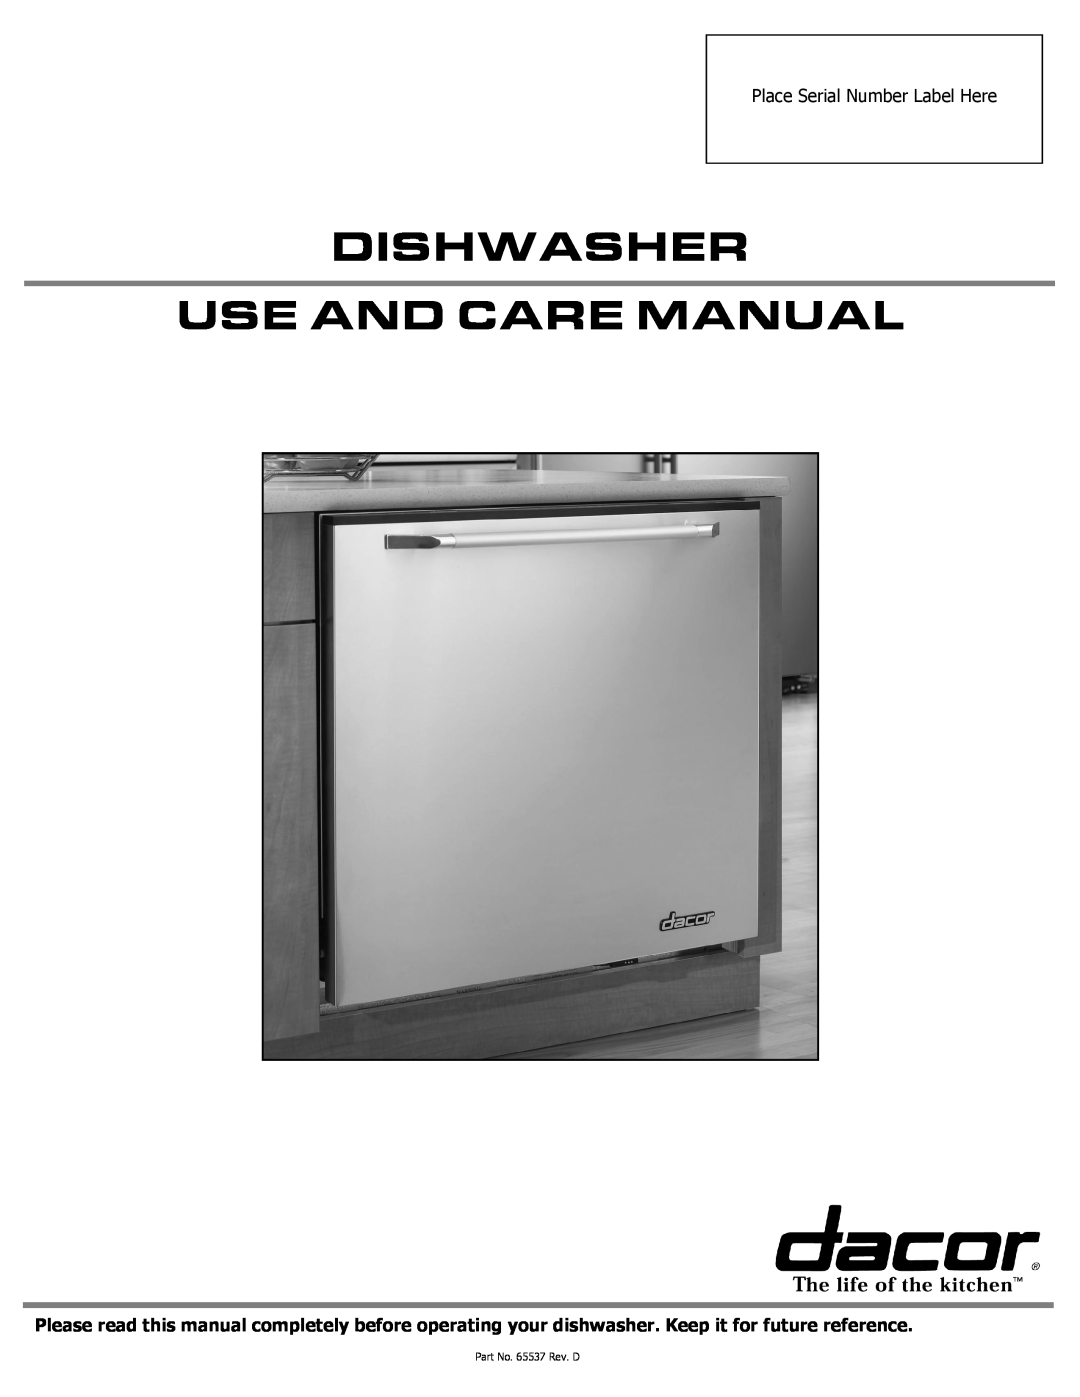 Dacor manual Dishwasher Use And Care Manual, Place Serial Number Label Here, Part No. 65537 Rev. D 